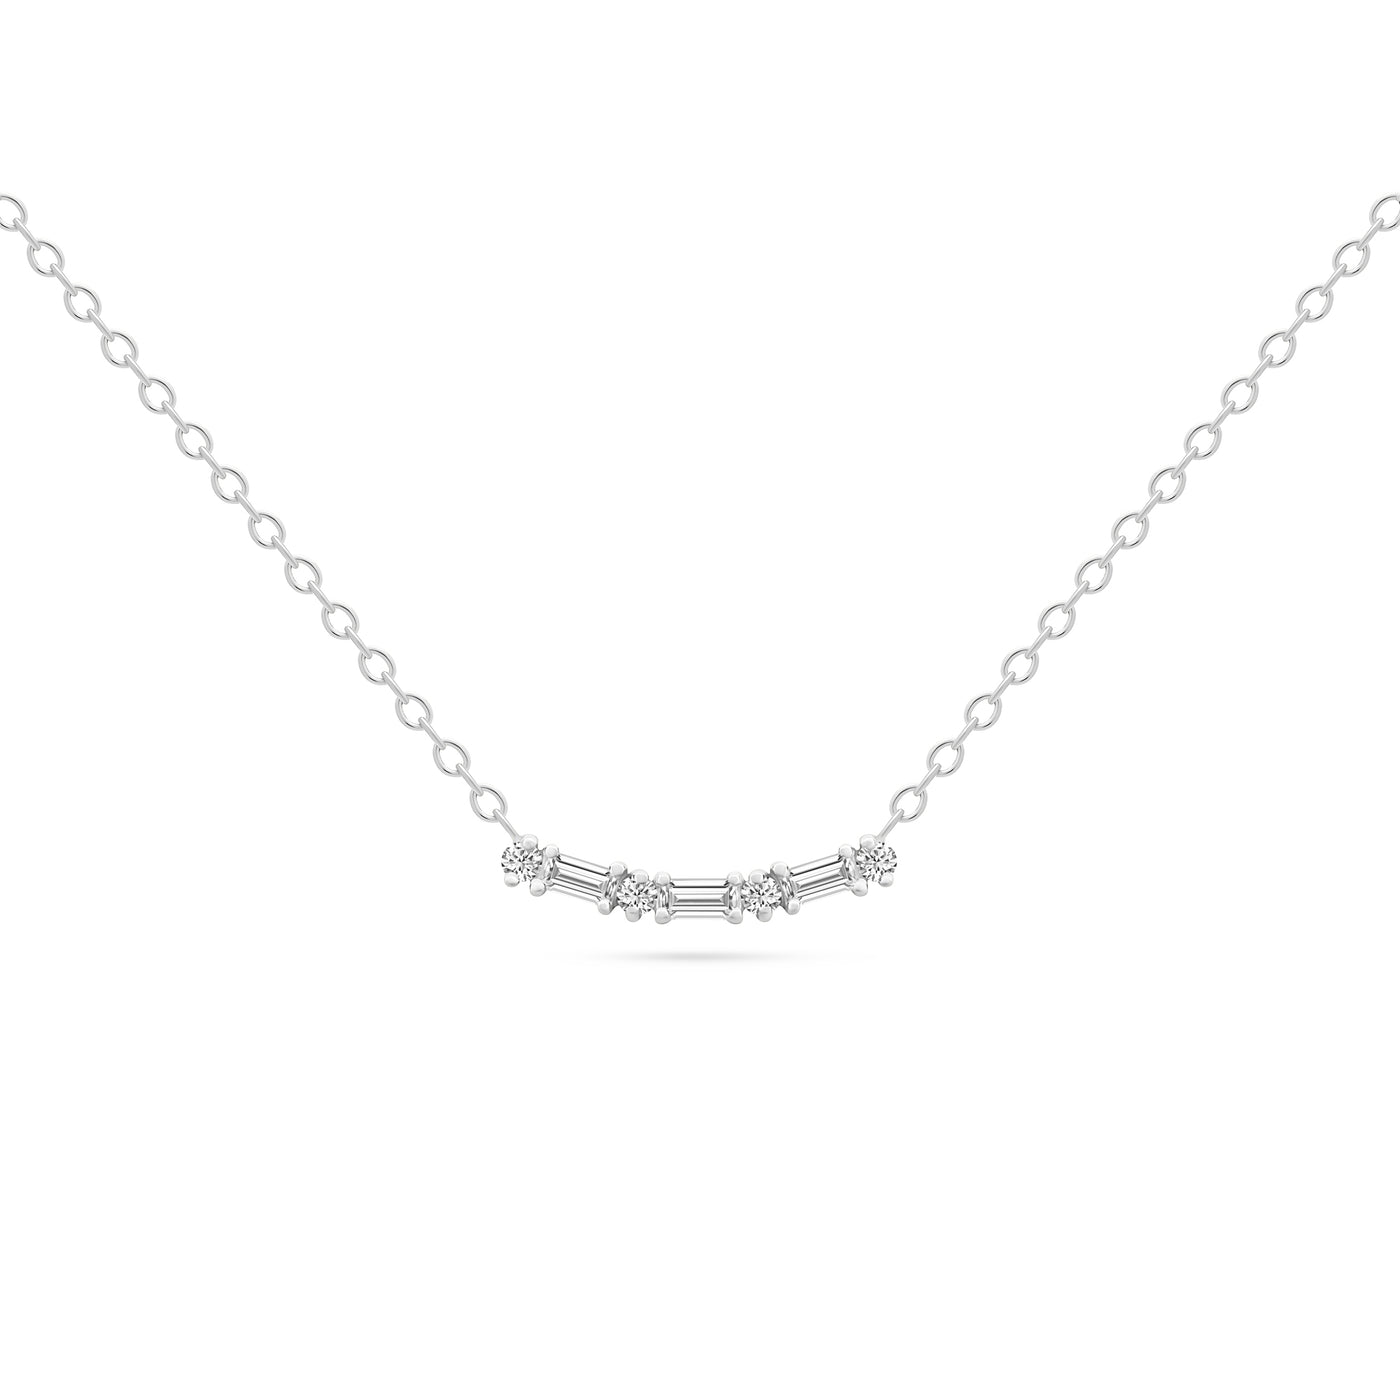 14K Solid Gold Baguette Round Seven Diamond Curved Bar Necklace